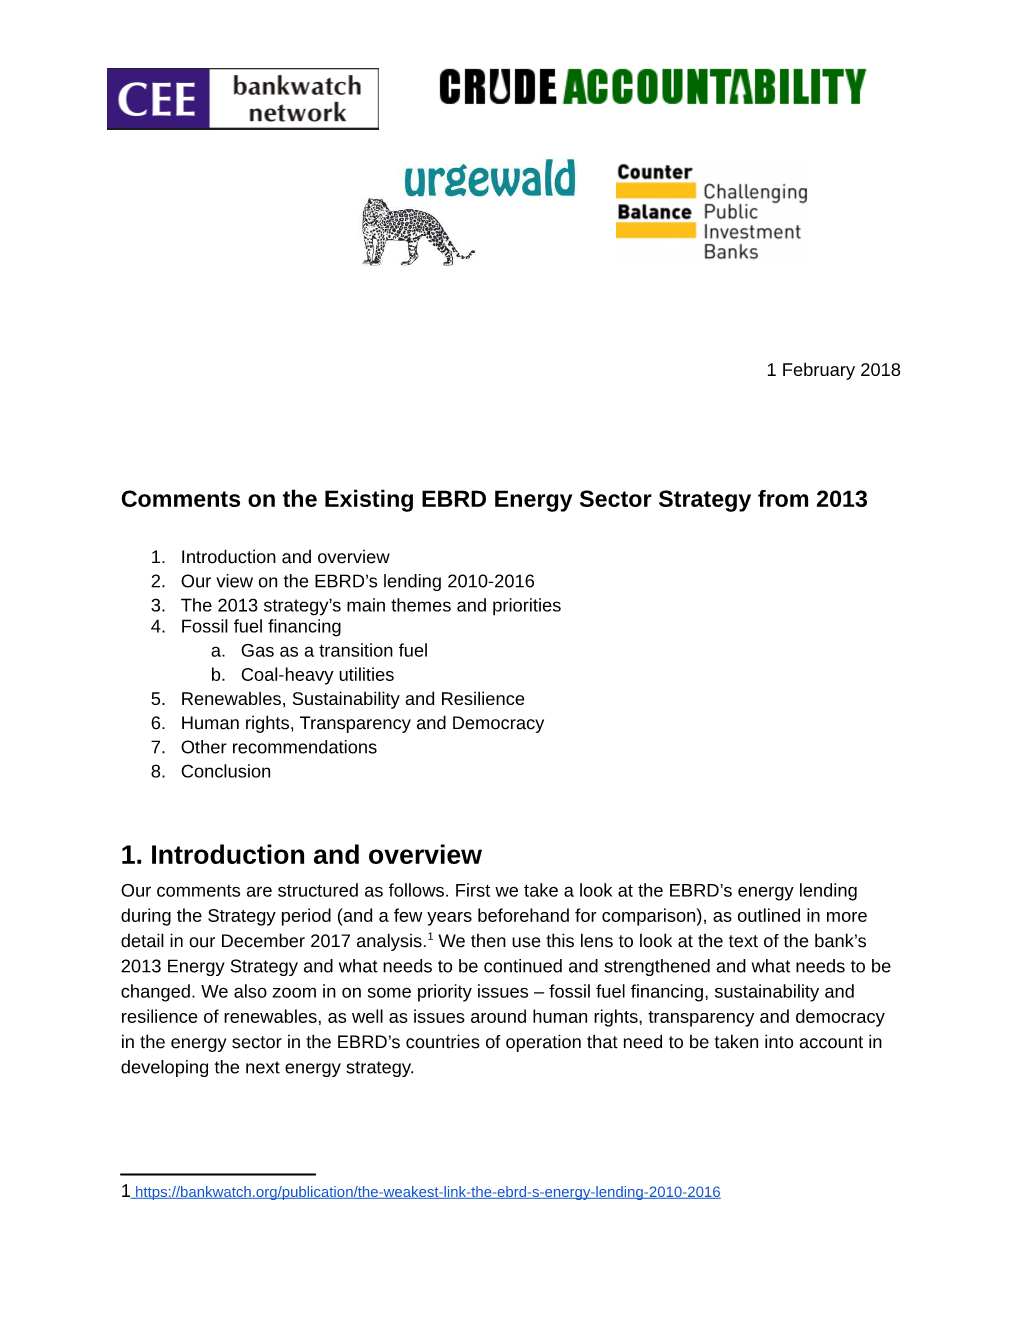 Our Recommendations for the EBRD Energy